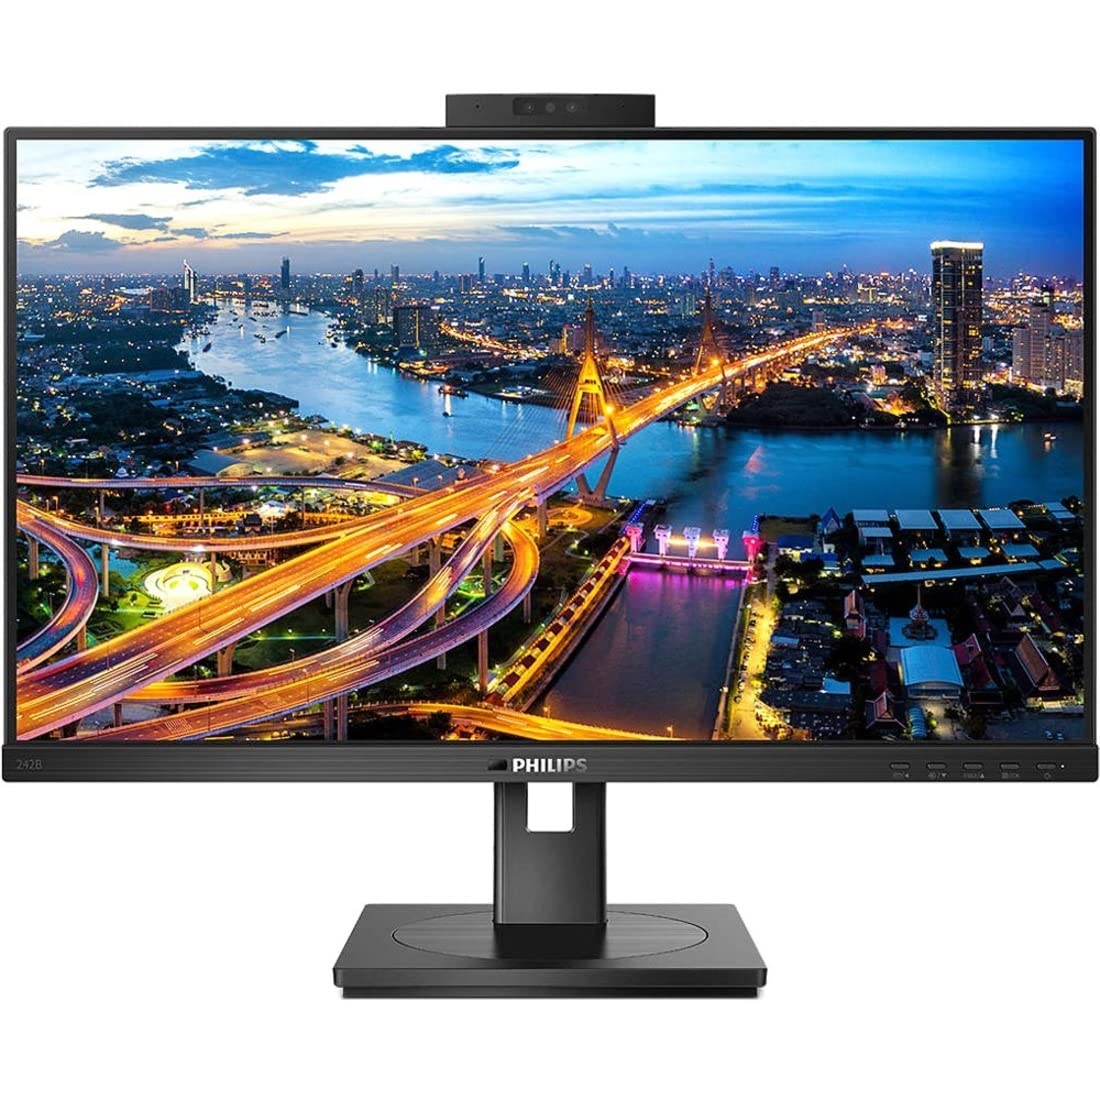 Philips 242B1H 23.8" 16:9 Full HD IPS WLED LCD Monitor with Windows Hello Webcam, Black